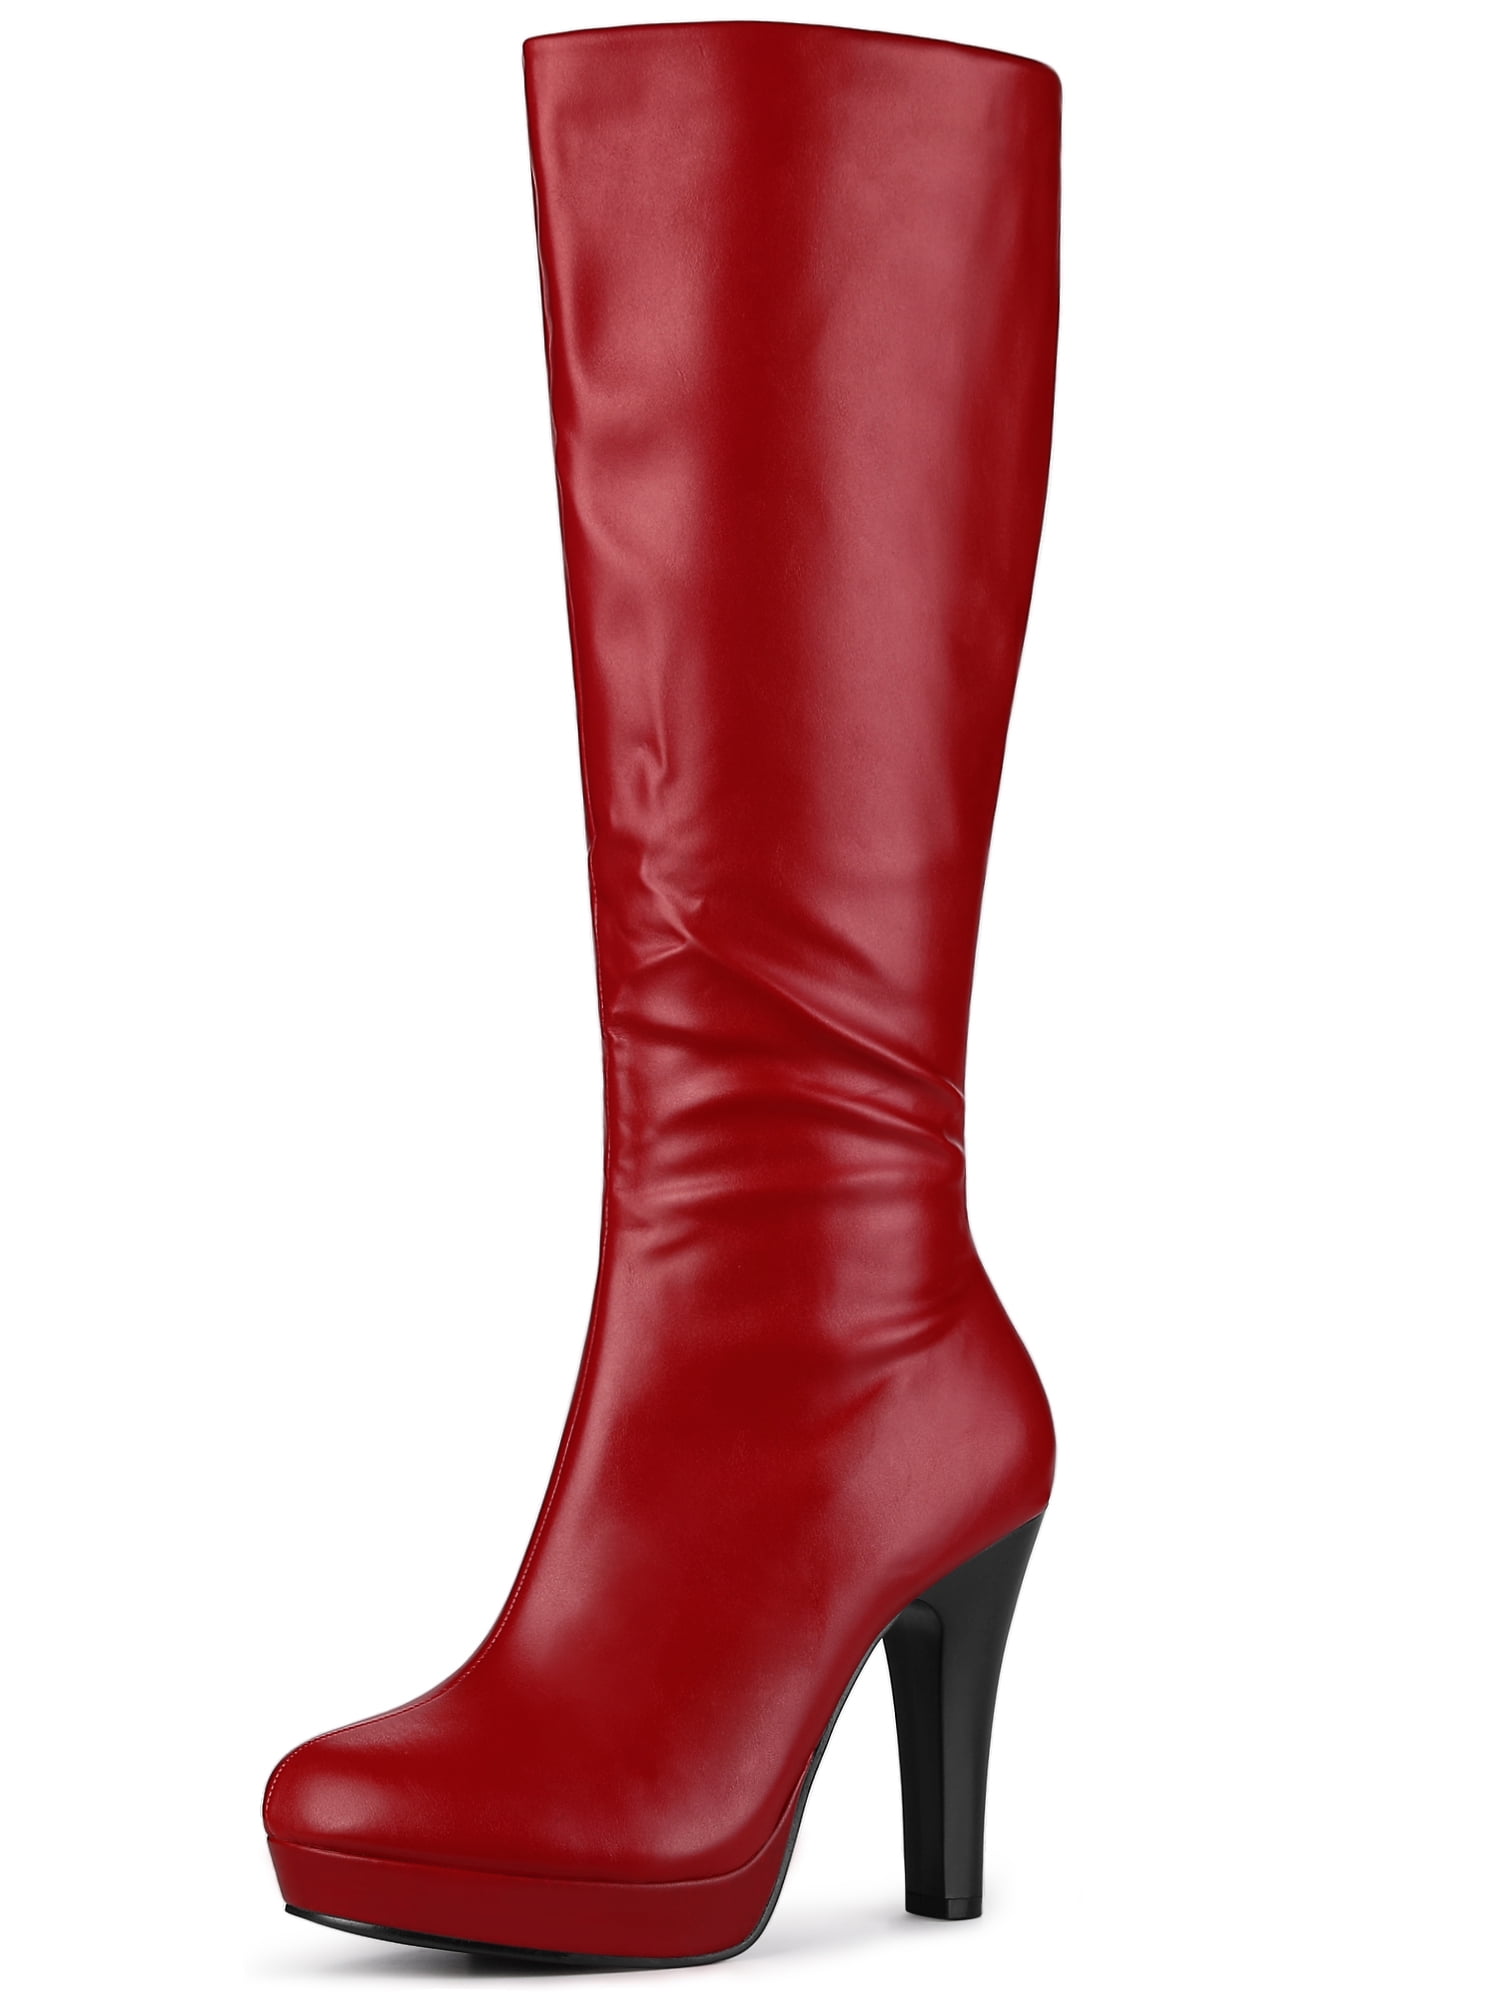 Unique Bargains Women's Chunky Heel Platform Round Toe Over the Knee High  Boots